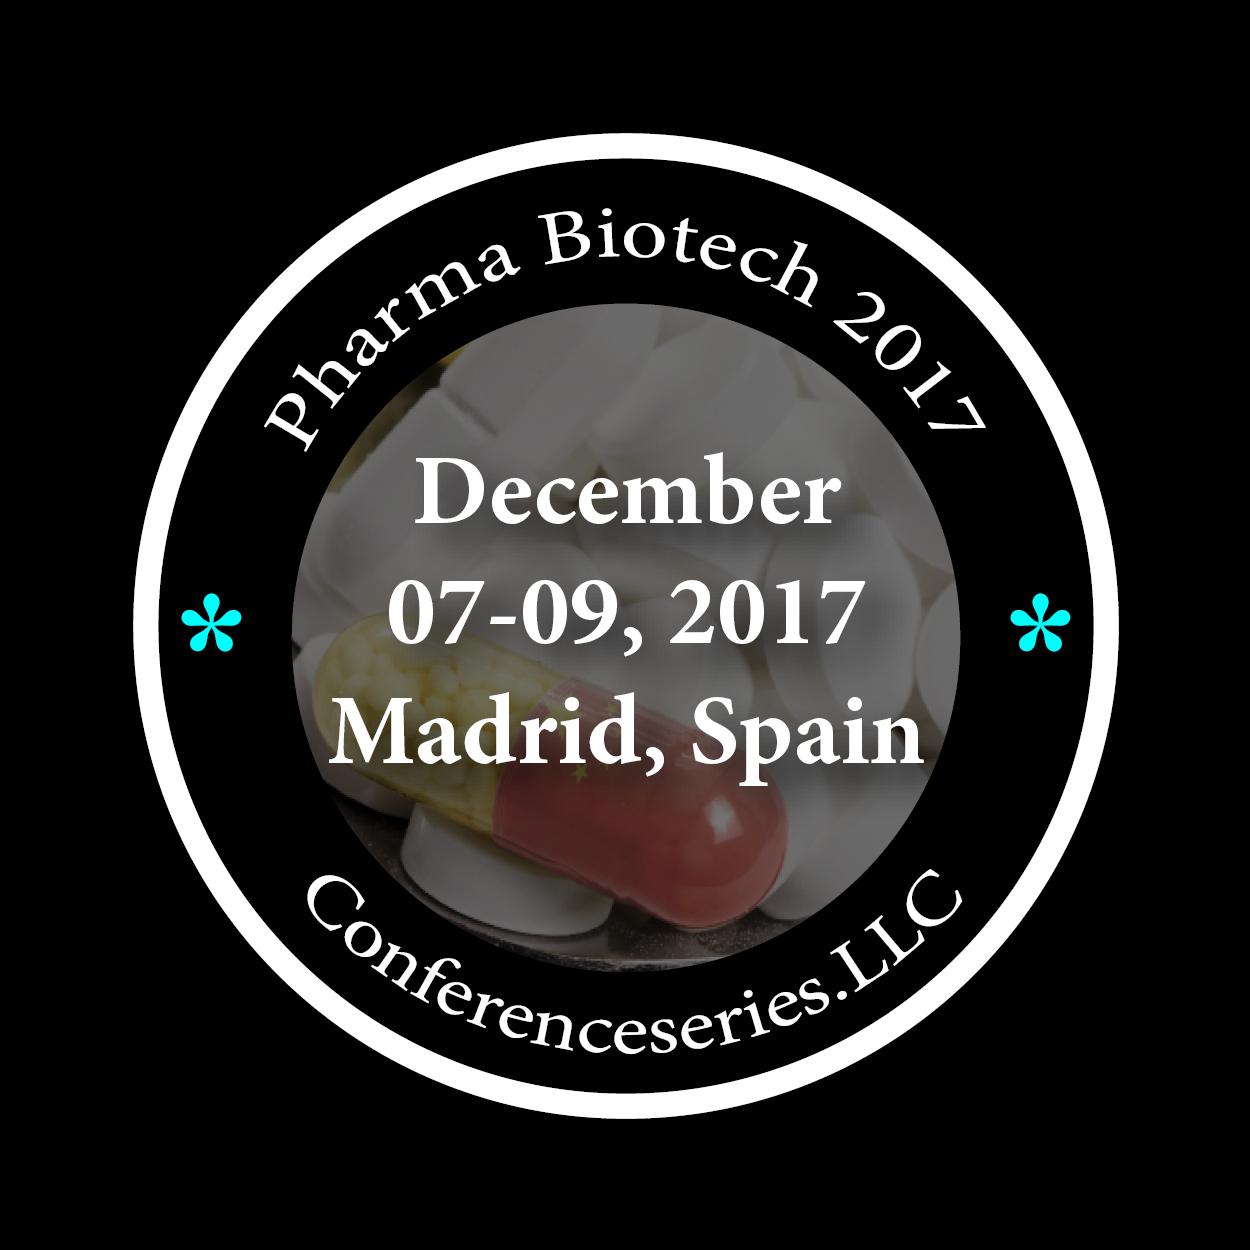 20th International Conference on 
Biotech Pharmaceuticals 
Conferenceseries LLC December 07-09, 2017 |Madrid, Spain
Theme: Research and Development Beginning With the Discovery of Novel Compounds
